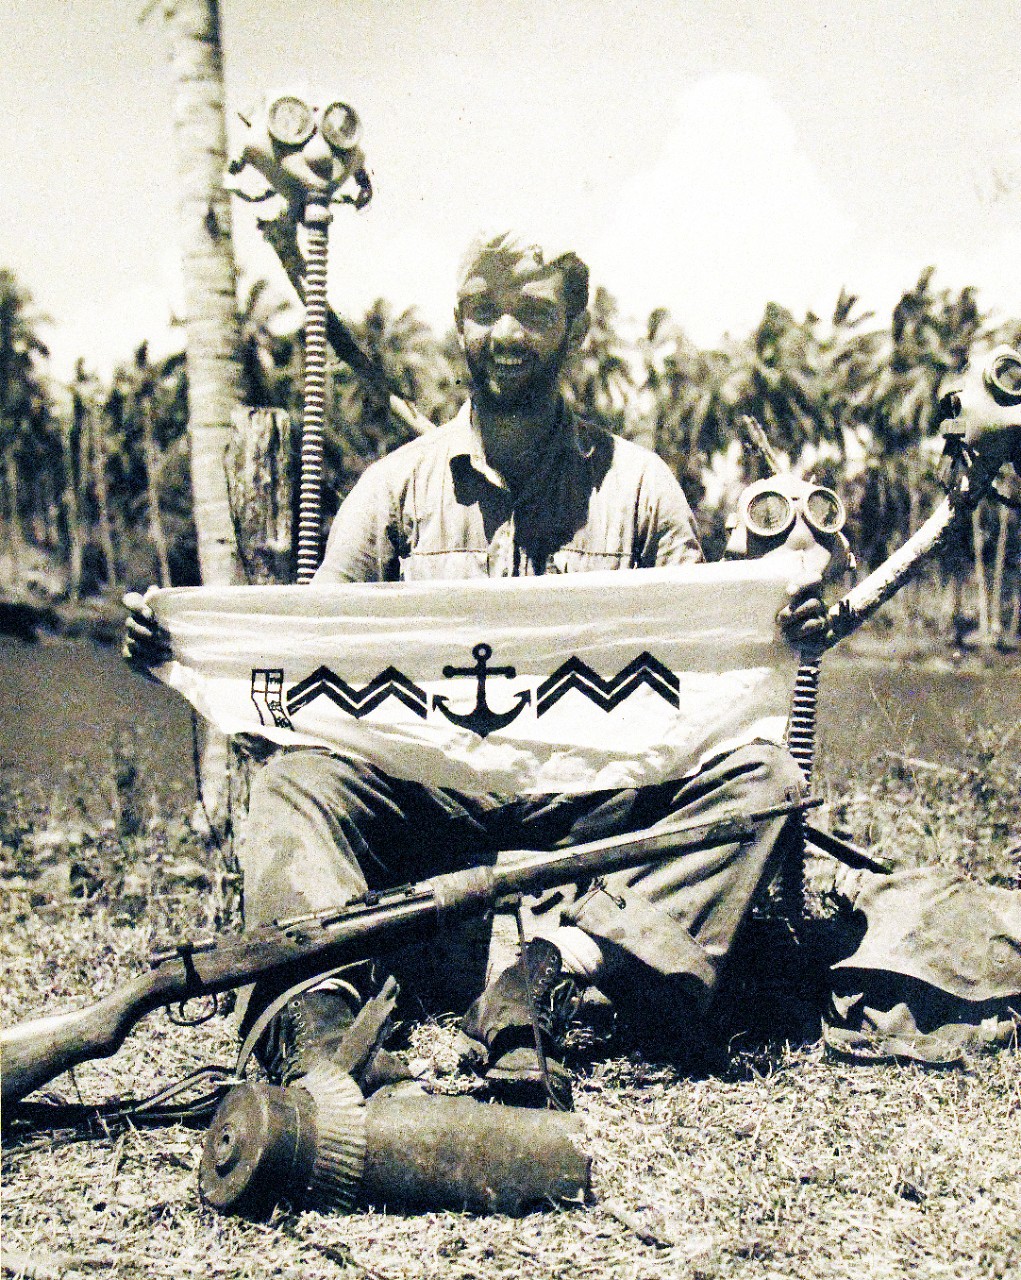 80-G-40285:  Guadalcanal Operation, August 1942-February 1943  U.S. Marine private Frank Massaro at Guadalcanal Island displays (as per original caption – “Japanese marine emblem.”)  Behind him are Japanese gas masks, 1942. U.S. Navy Photograph, now in the collections of the National Archives  (2015/10/20).